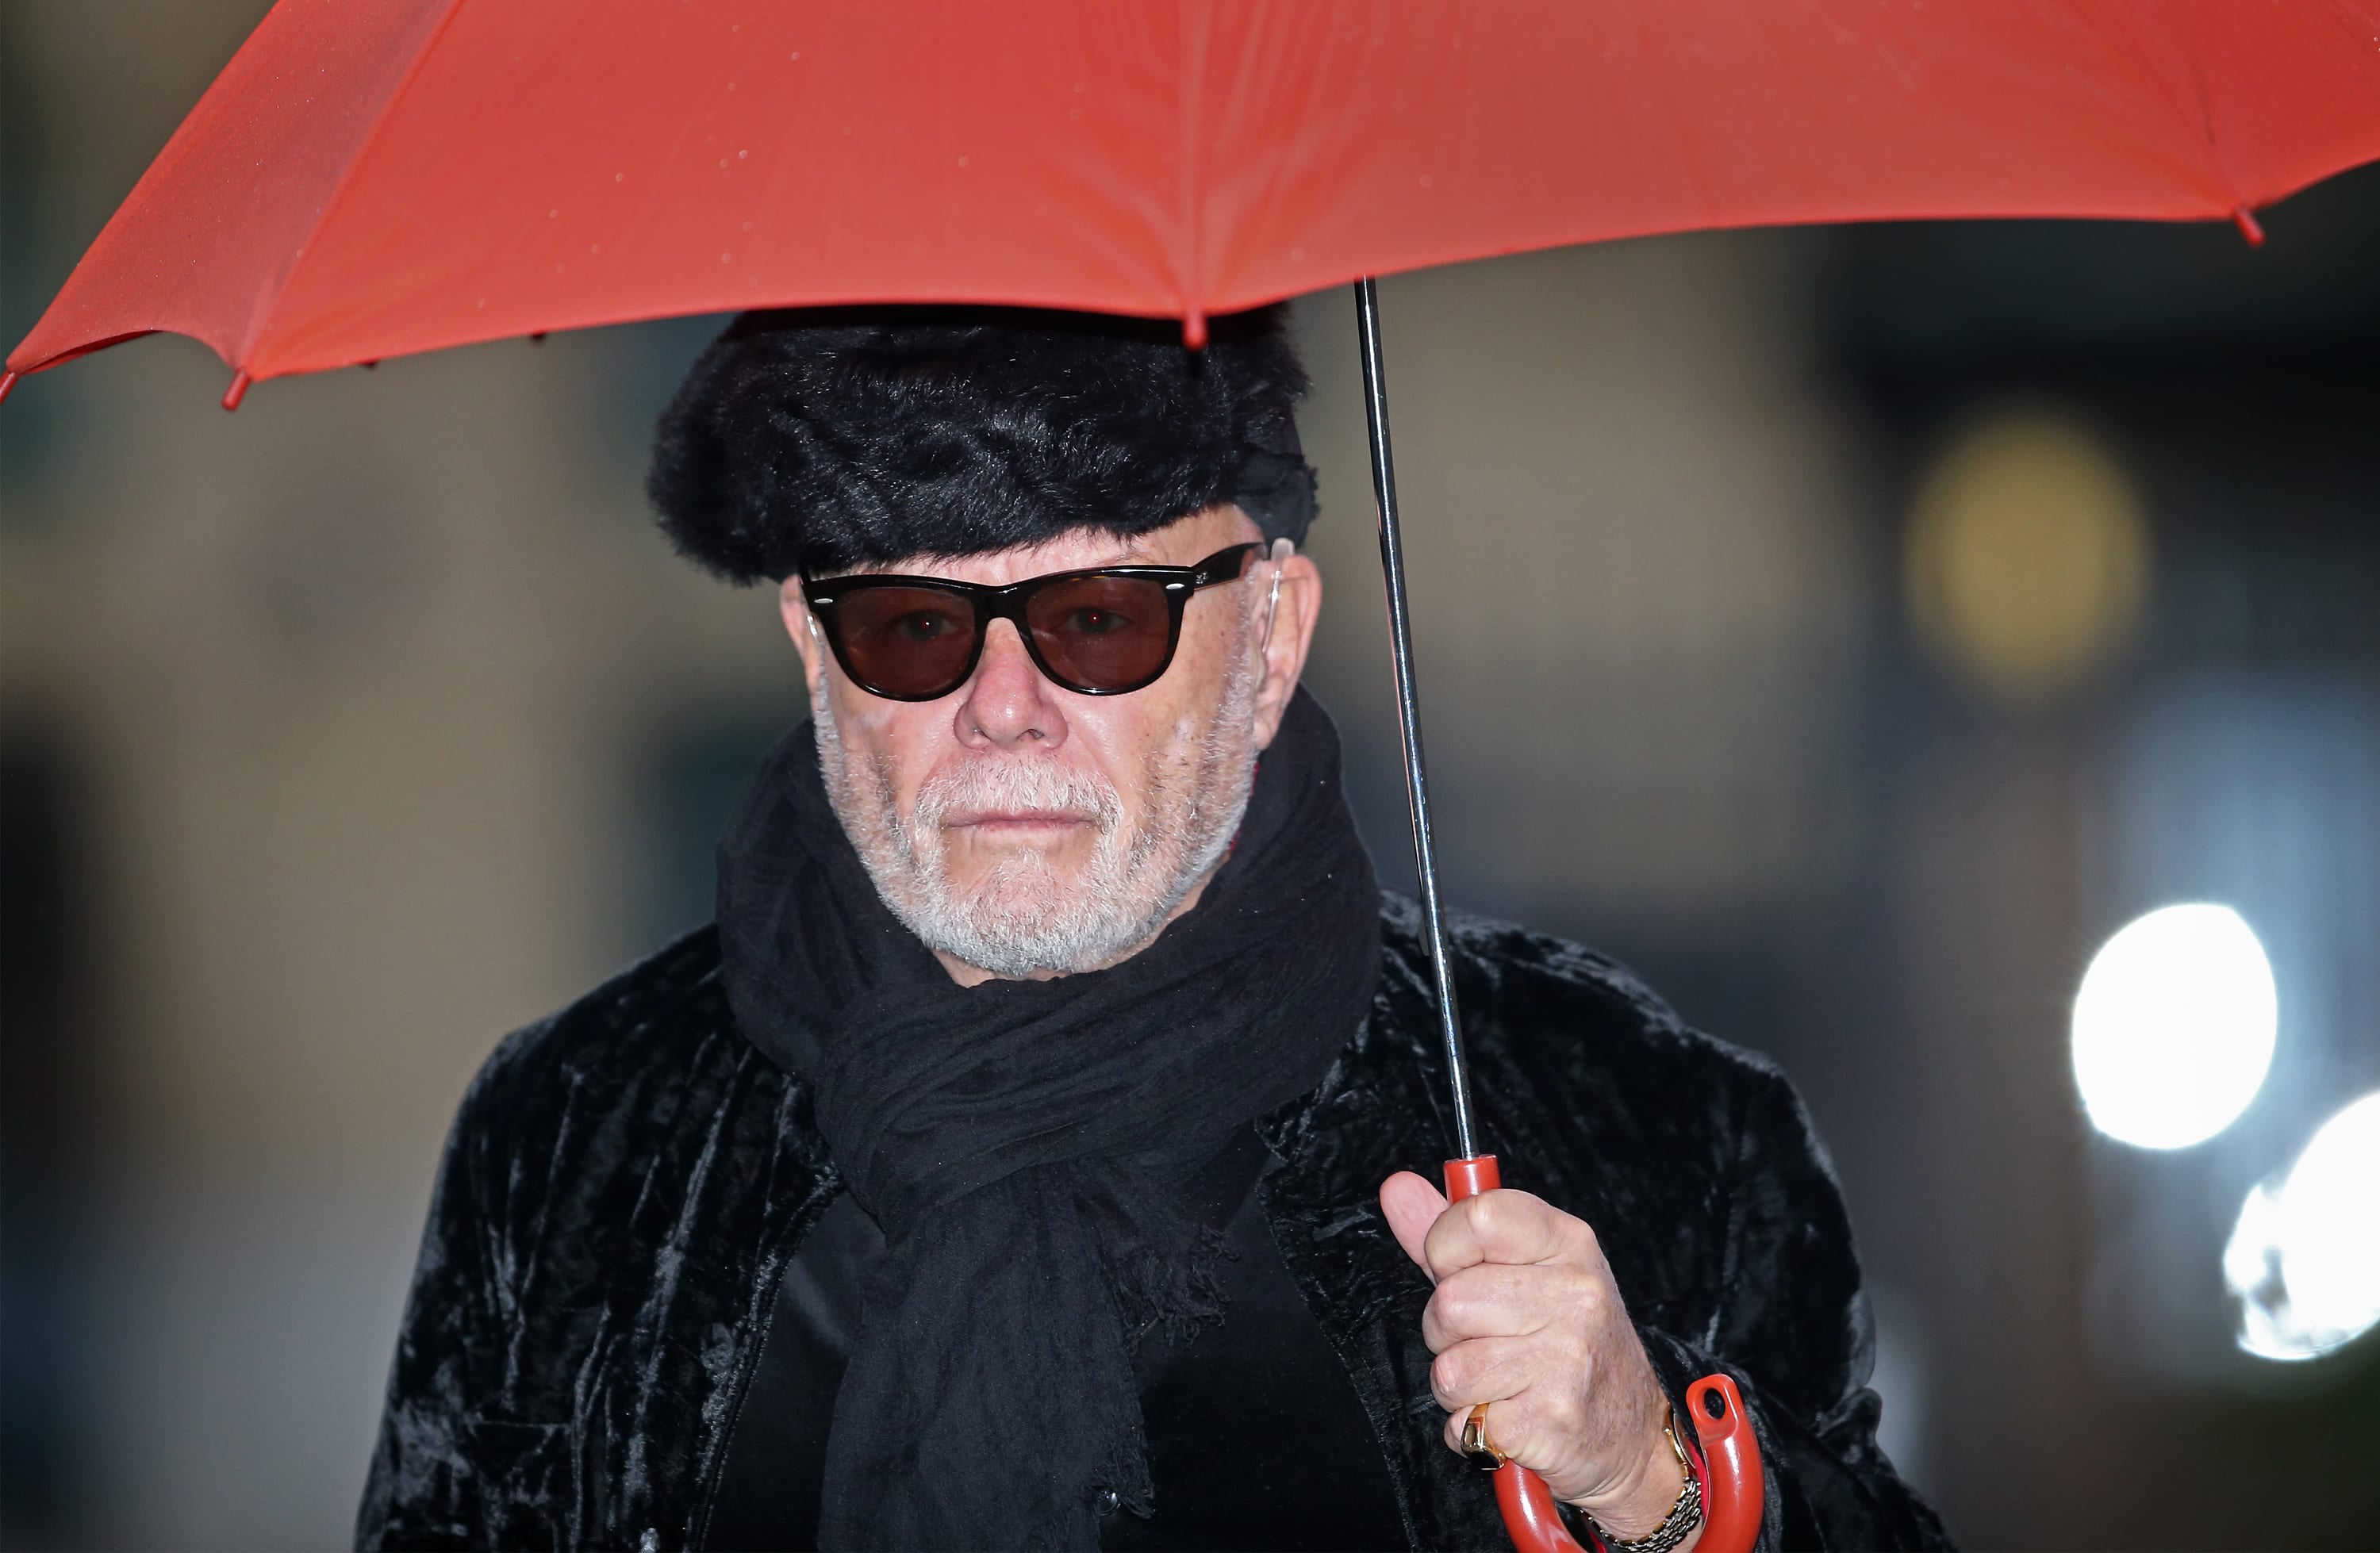 Convicted pedophile Gary Glitter will not get tunes royalties from ‘Joker,’ report suggests – CNBC